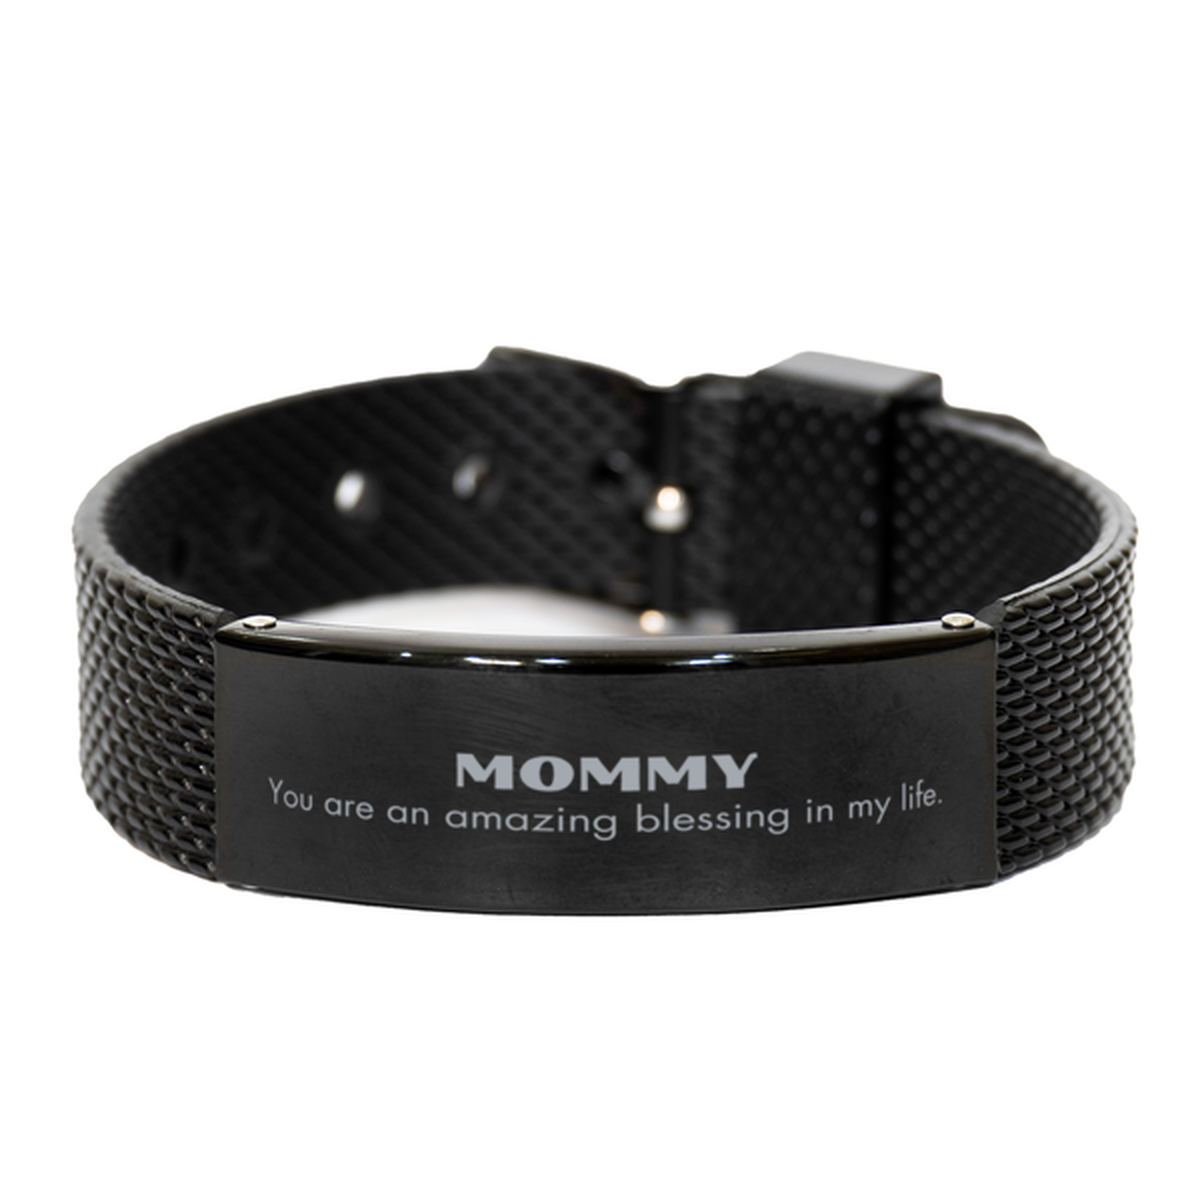 Mommy Black Shark Mesh Bracelet, You are an amazing blessing in my life, Thank You Gifts For Mommy, Inspirational Birthday Christmas Unique Gifts For Mommy